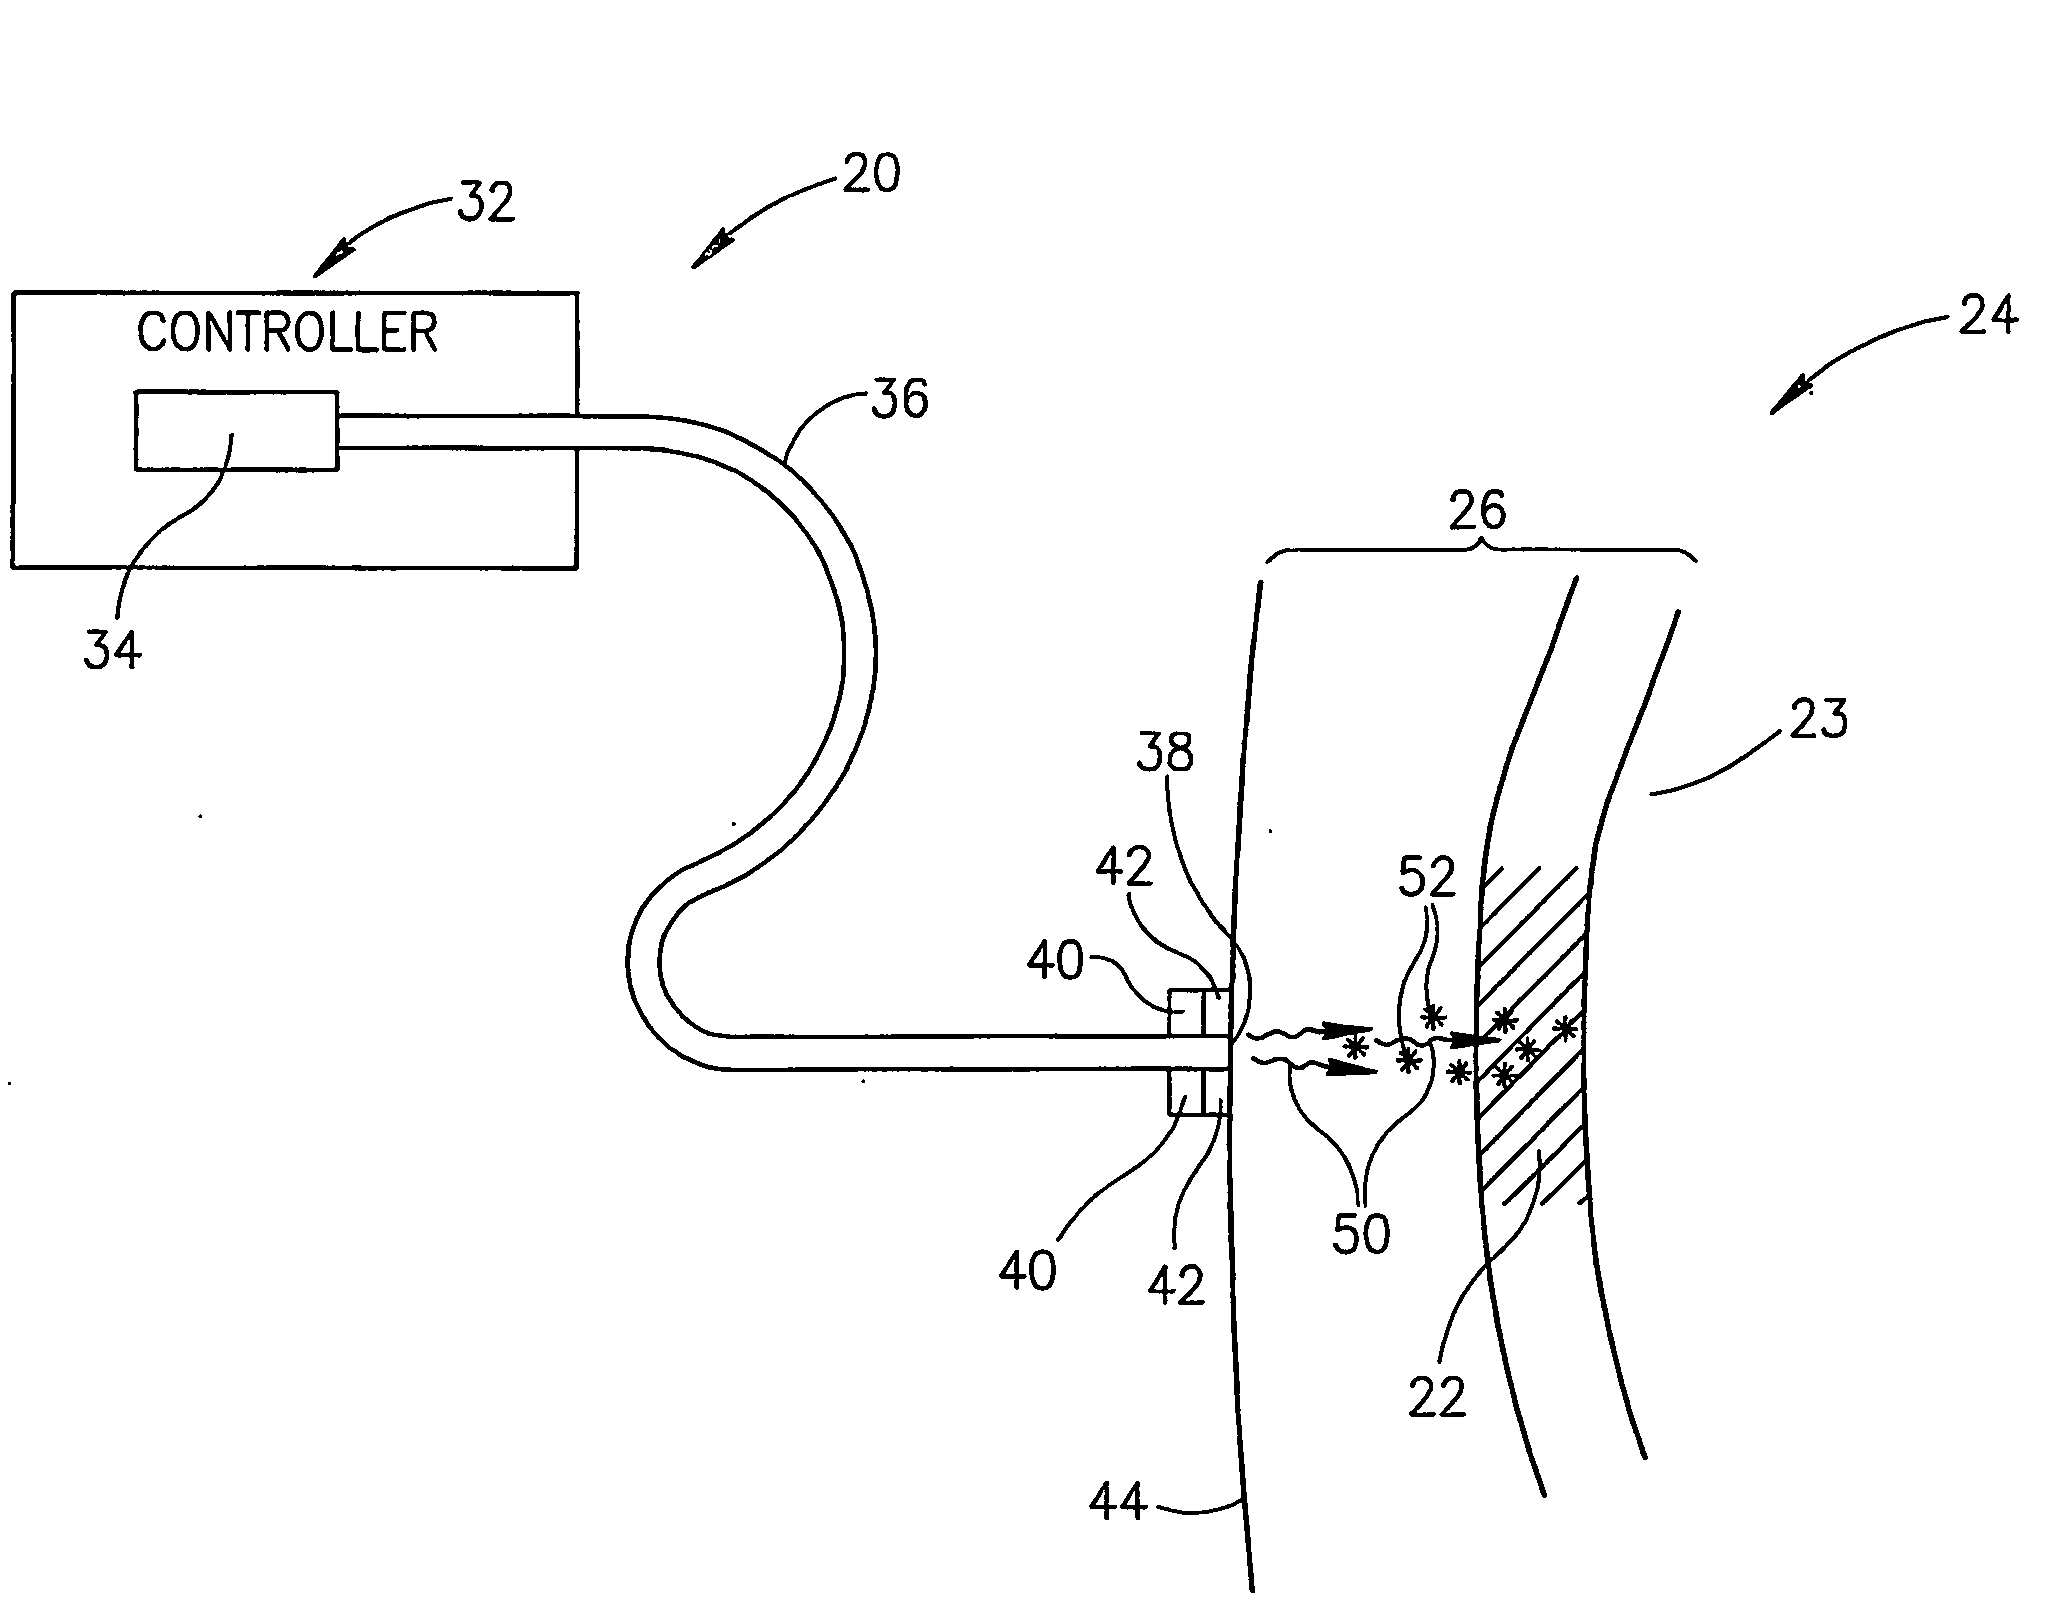 Photoacoustic Assay Method and Apparatus